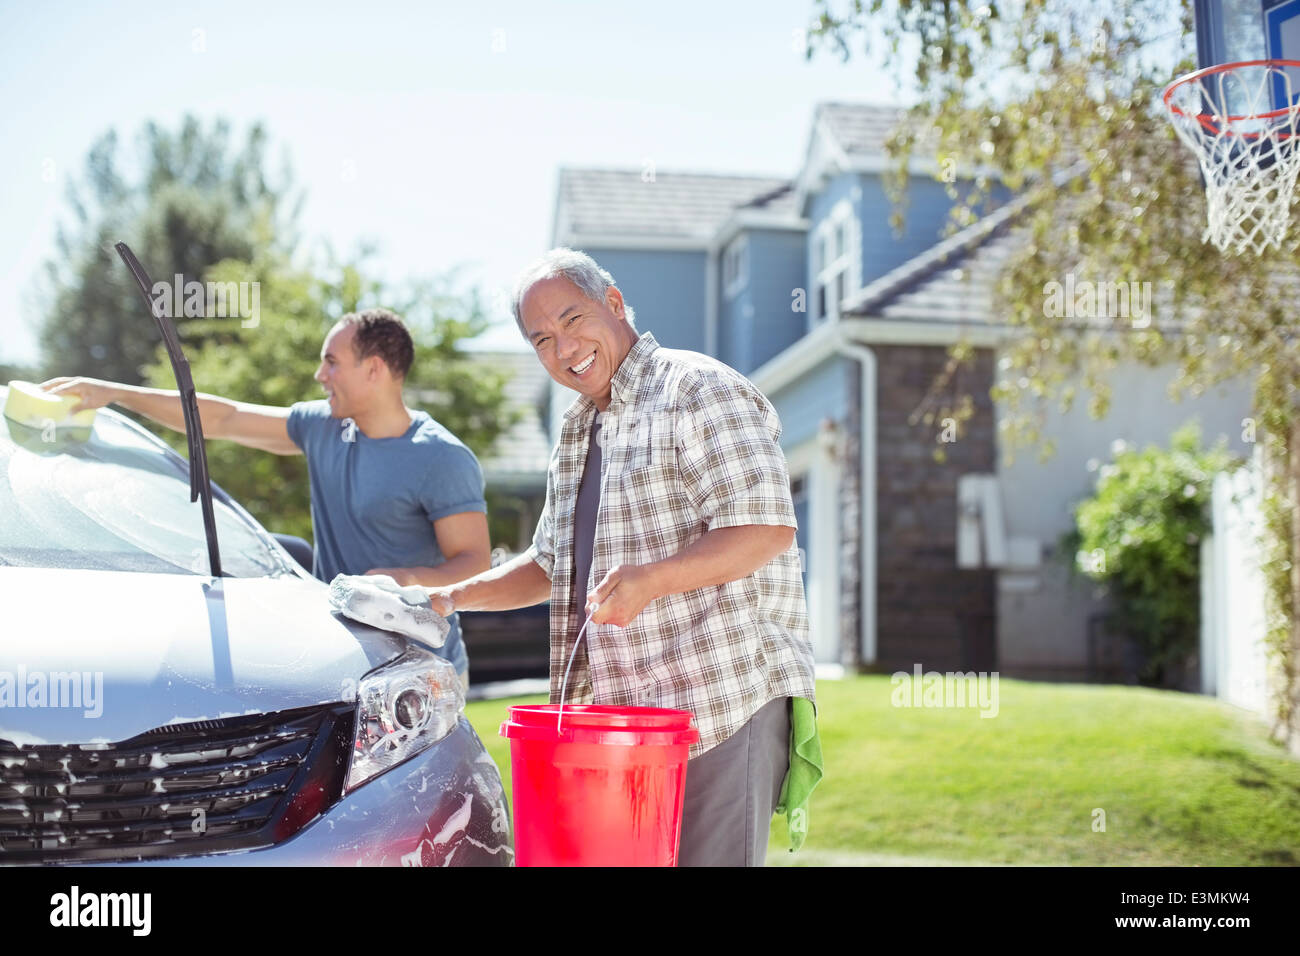 Portrait of smiling father and son washing car in driveway Stock Photo